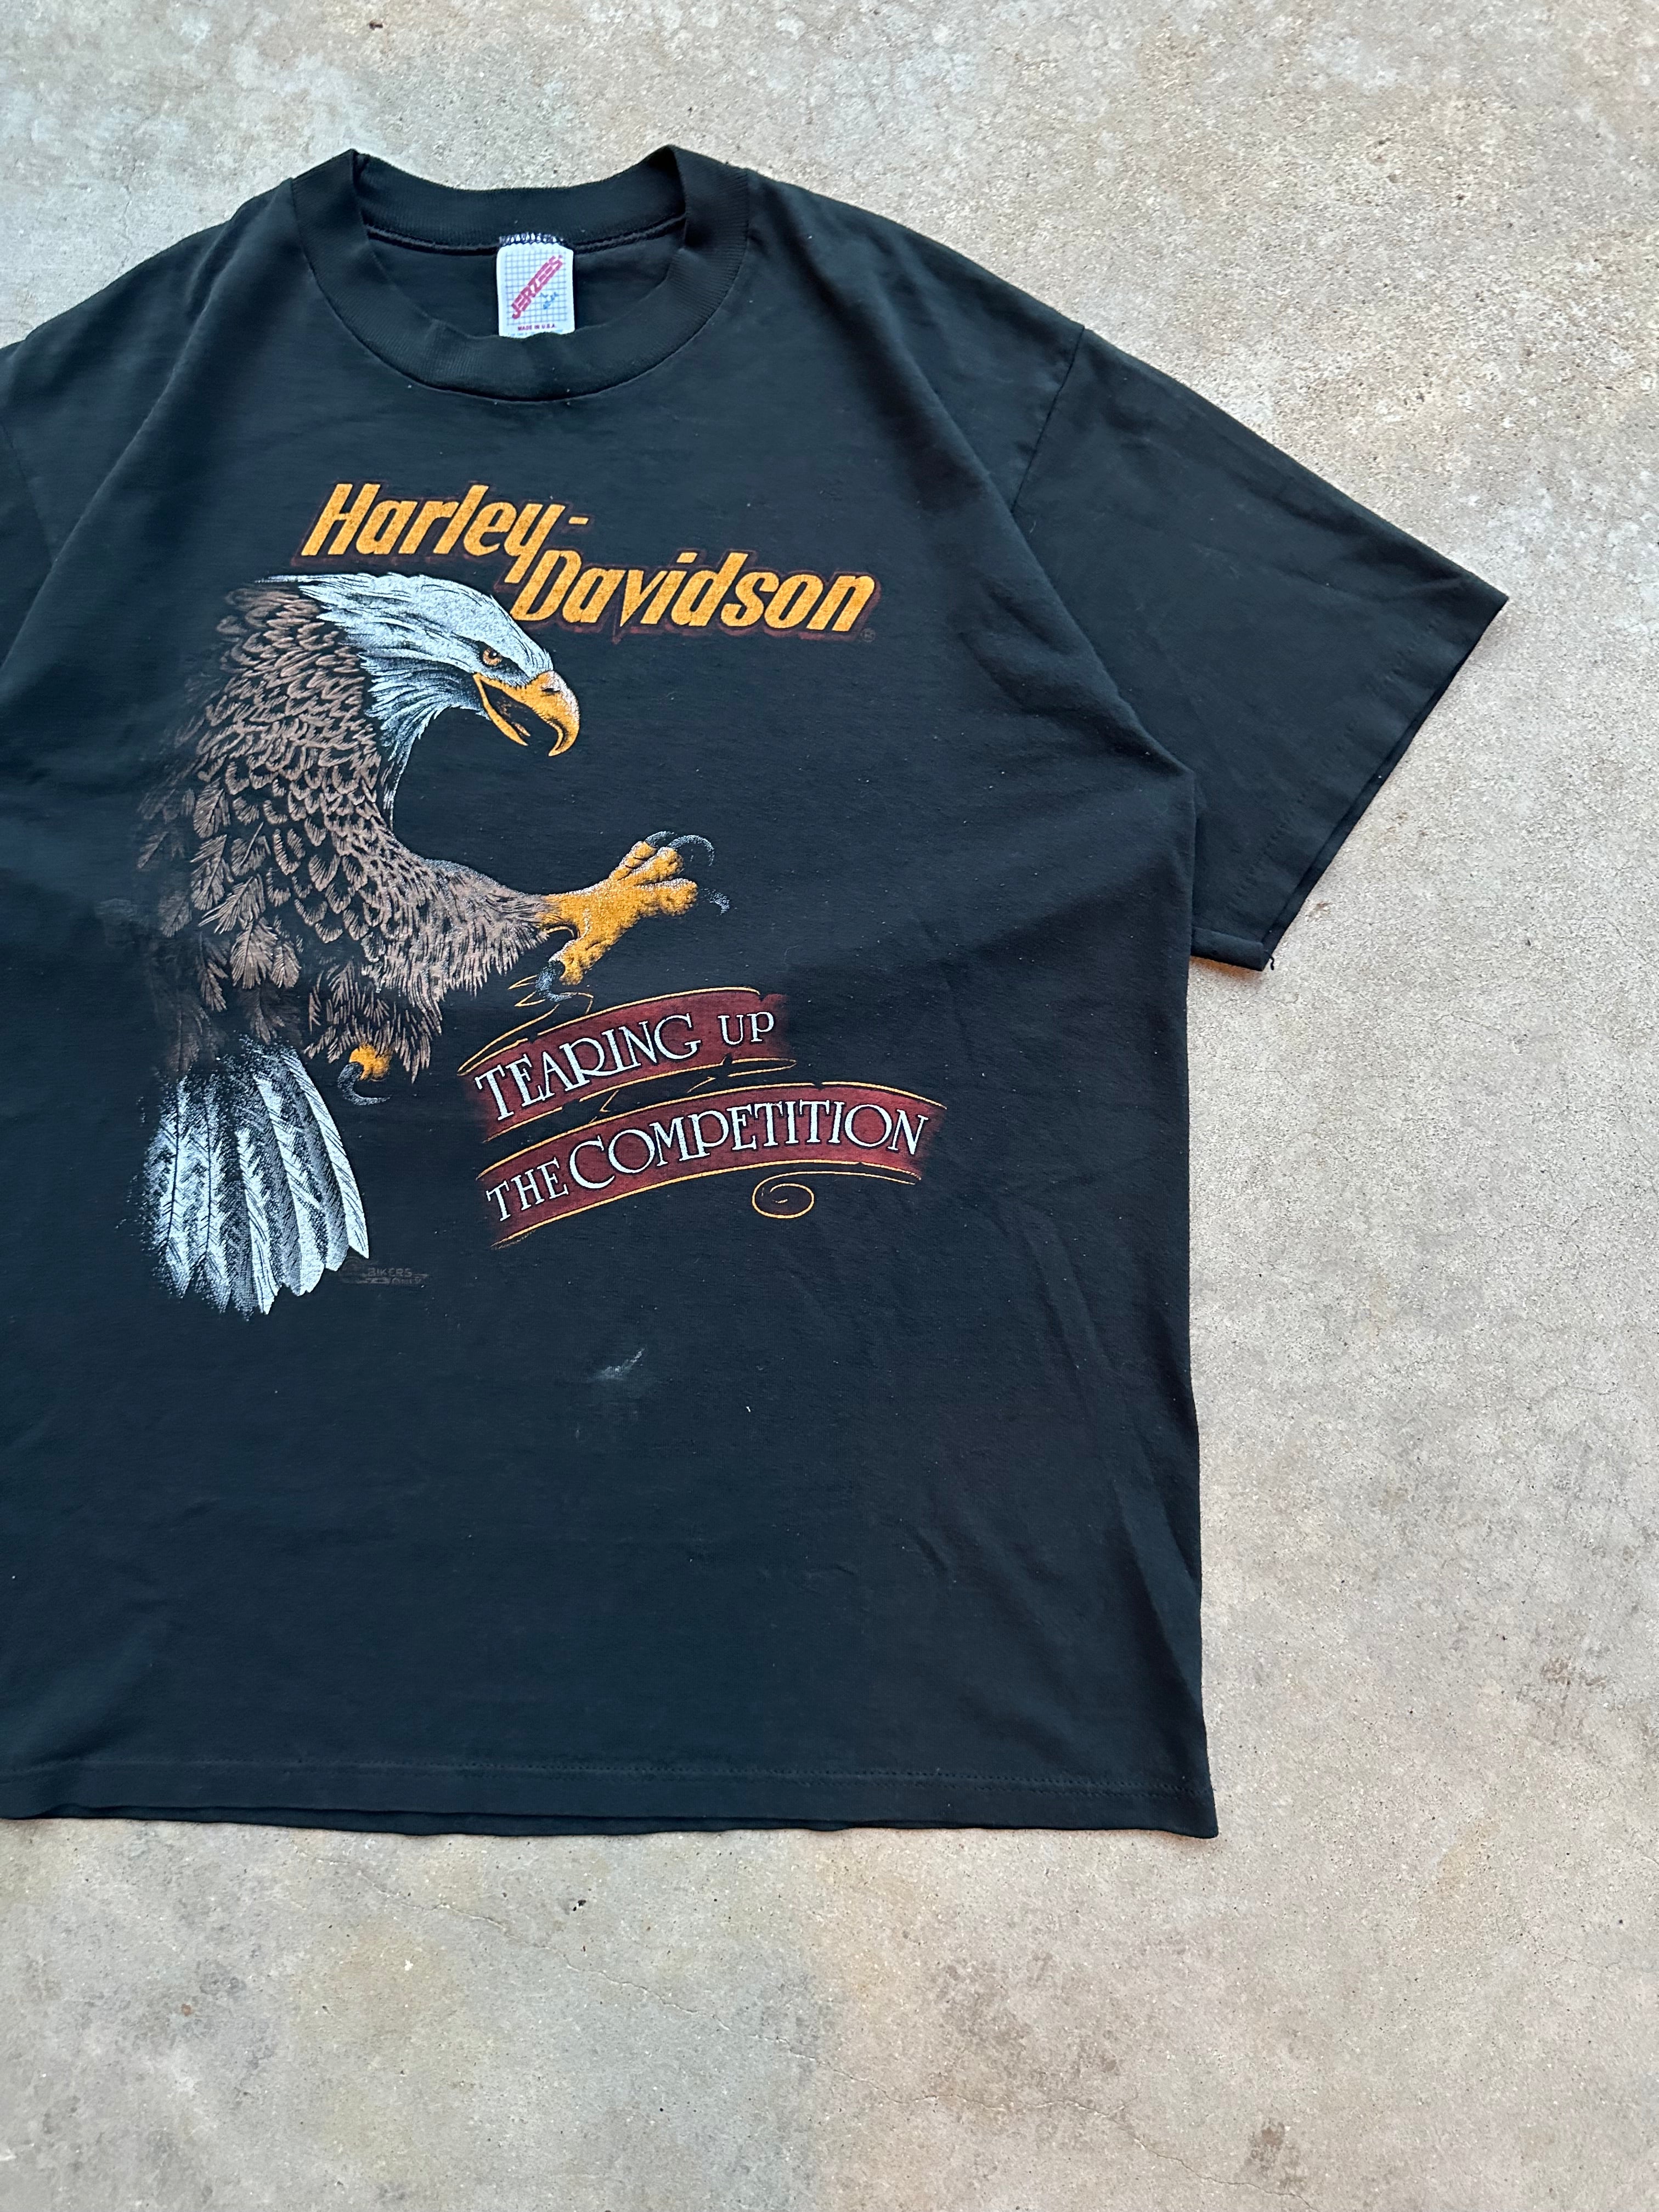 1980s Harley Davidson Tearing Up The Competition T-Shirt (M/L)